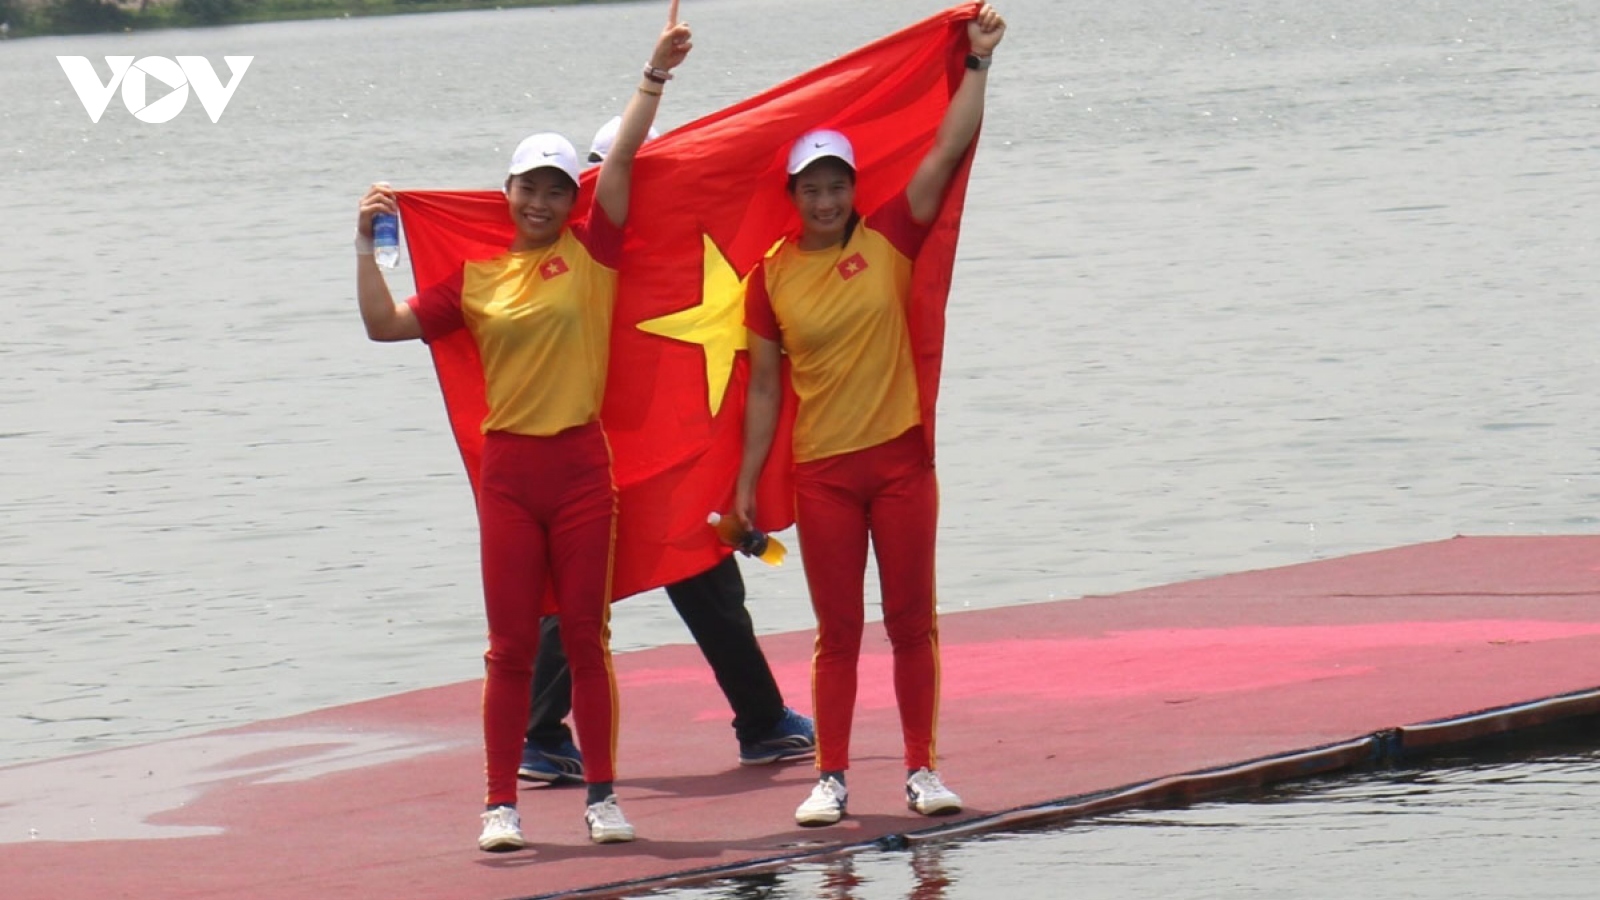 SEA Games update: More gold for Vietnam in canoeing event on morning of May 18 